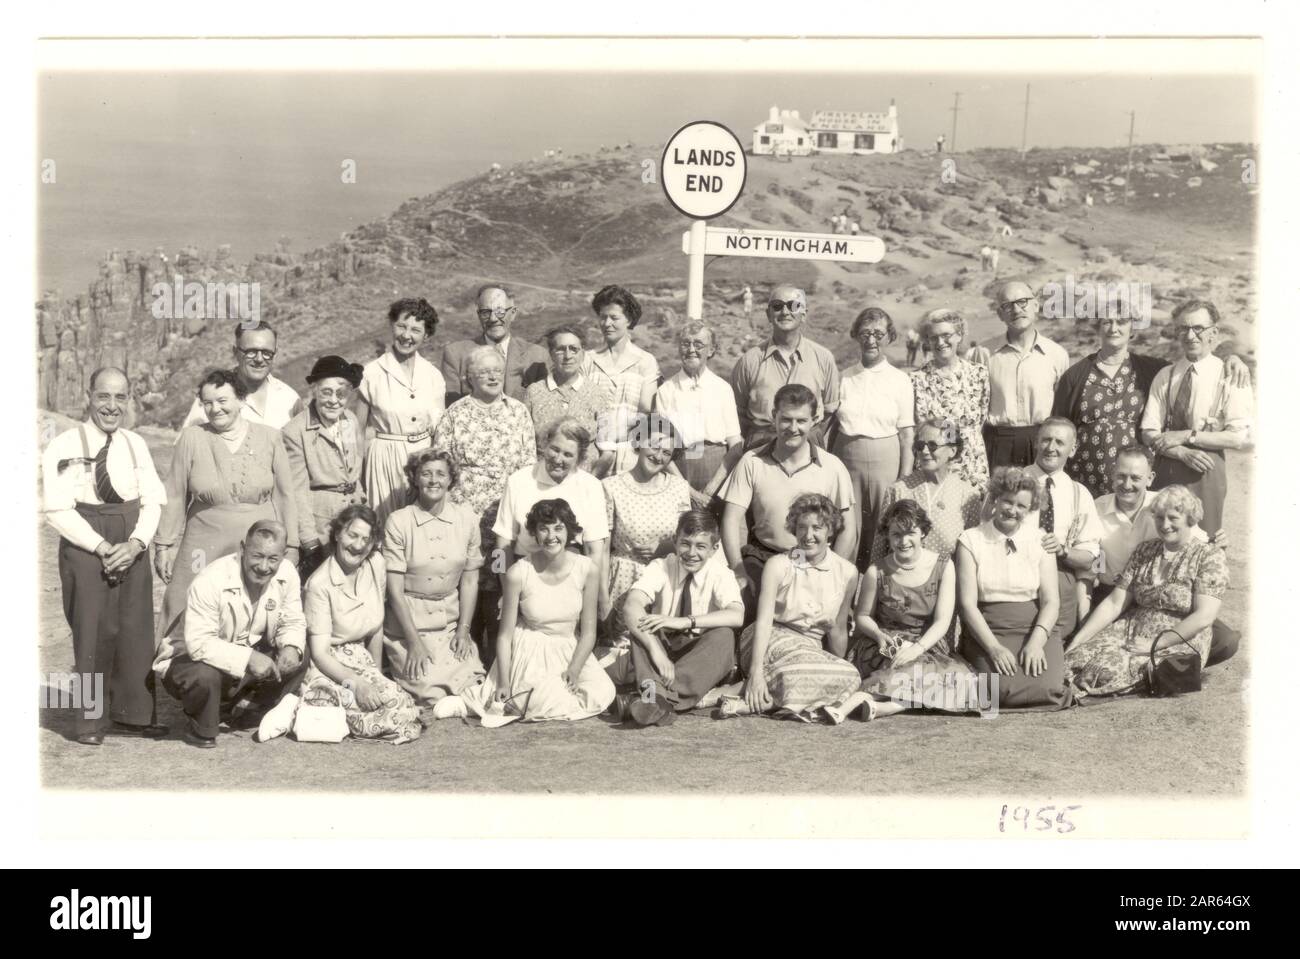 1950's commercial photo of day trippers group on holiday from Nottingham pose for a photo next to the famous signpost at Land's End, Cornwall, U.K. dated August 1955 Stock Photo